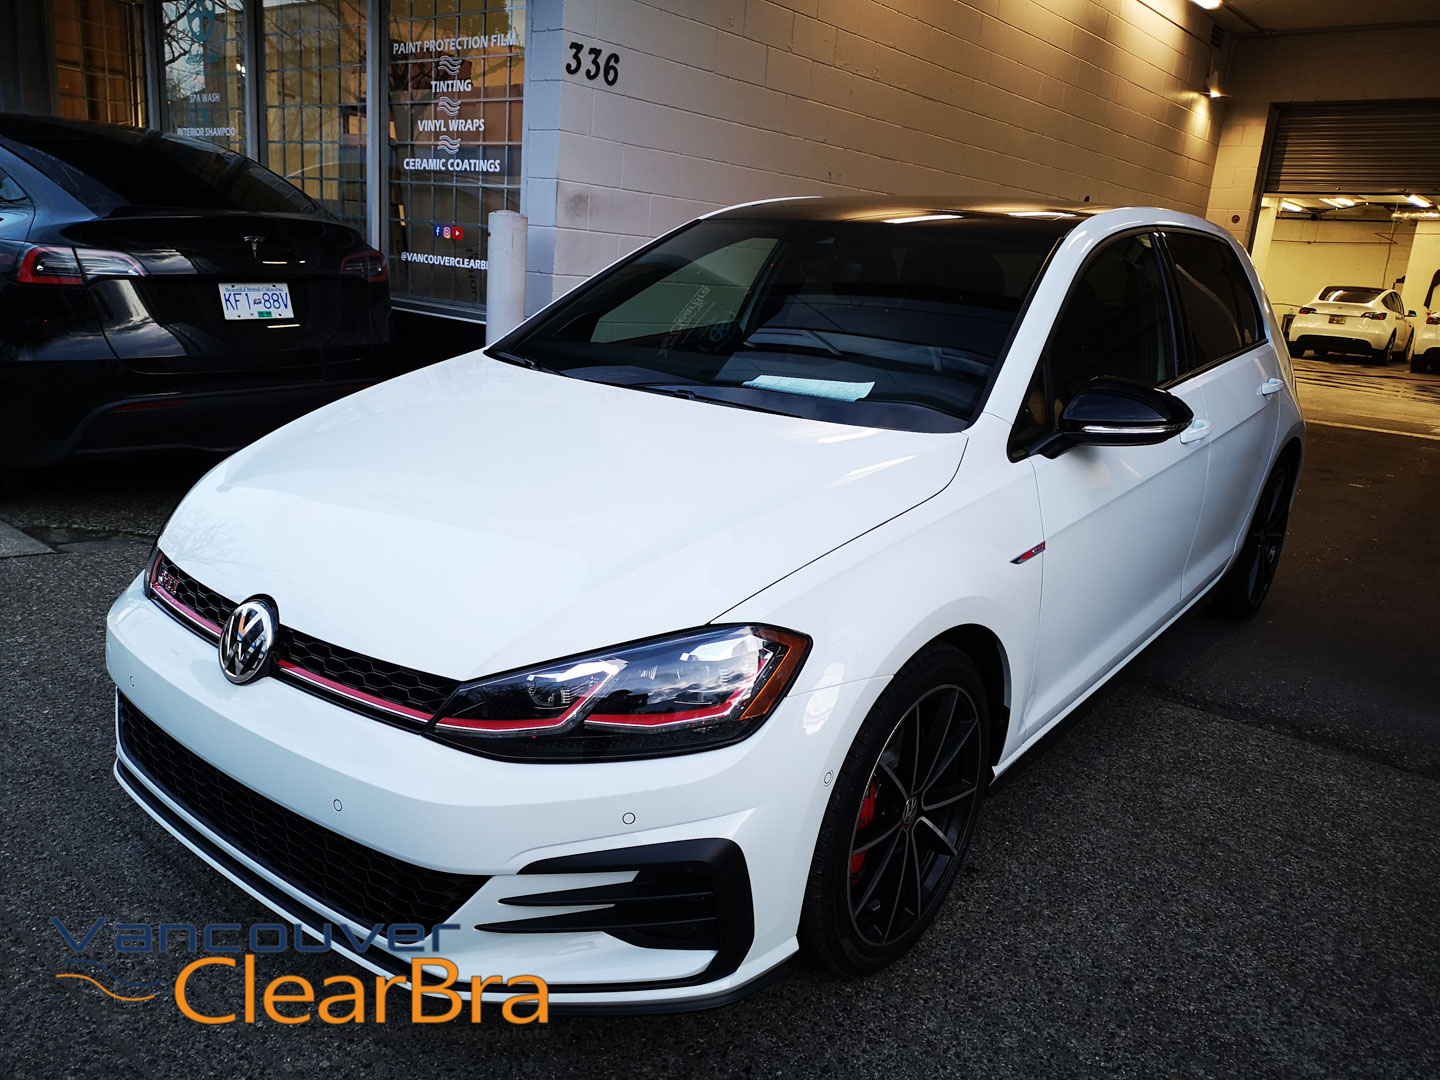 https://blog.vancouverclearbra.com/wp-content/uploads/2021/05/xpel-ultimate-xpel-stealth-satin-clear-bra-paint-protection-film-Vancouver-ClearBra-130.jpg